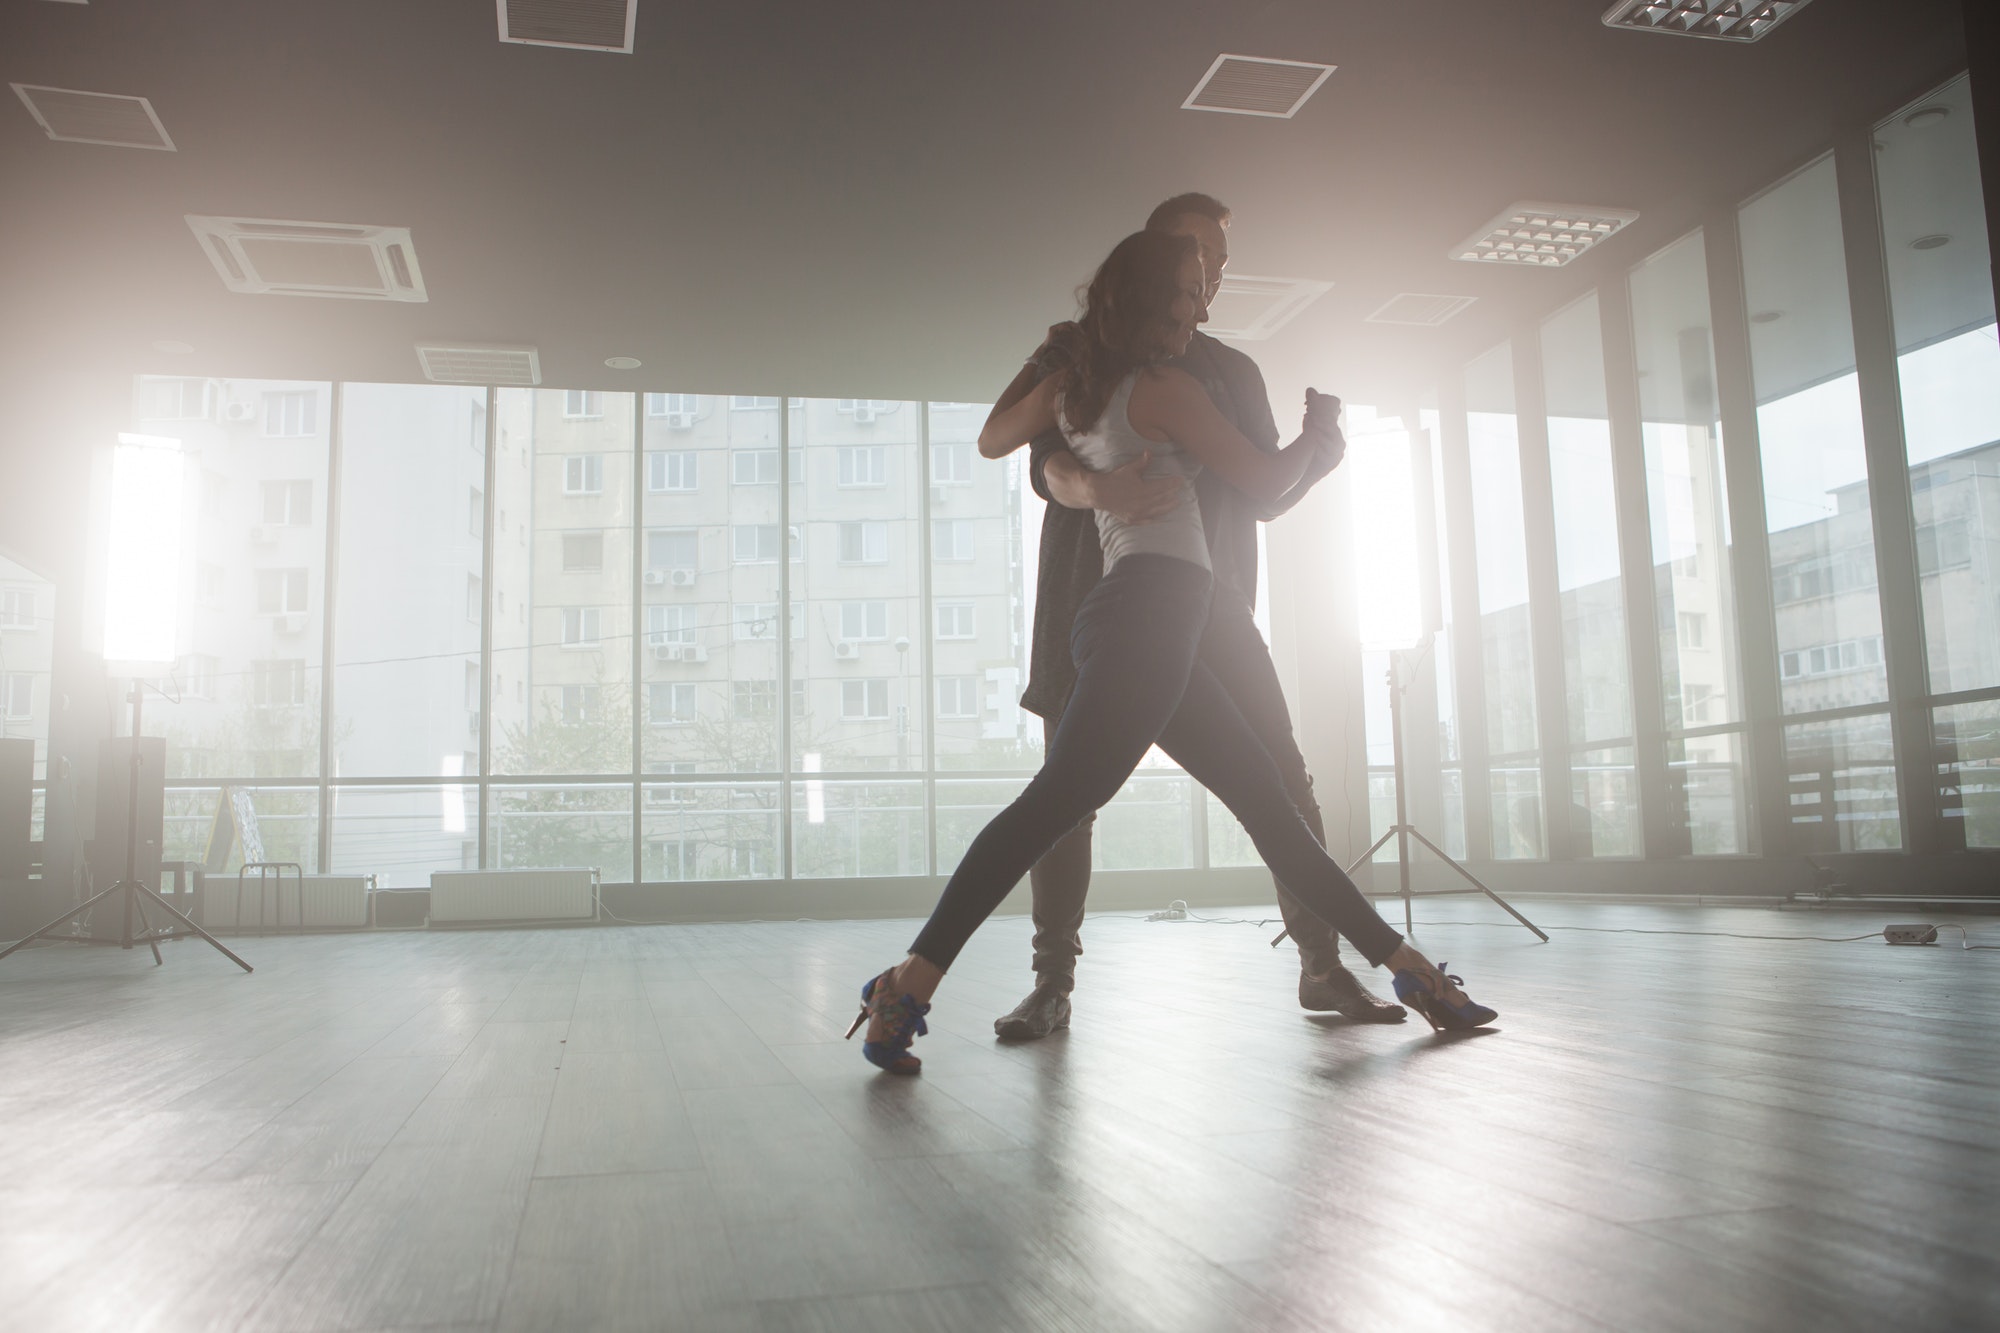 Kizomba dancers showing their passion for dancing kizomba in front a dancing room with big windows